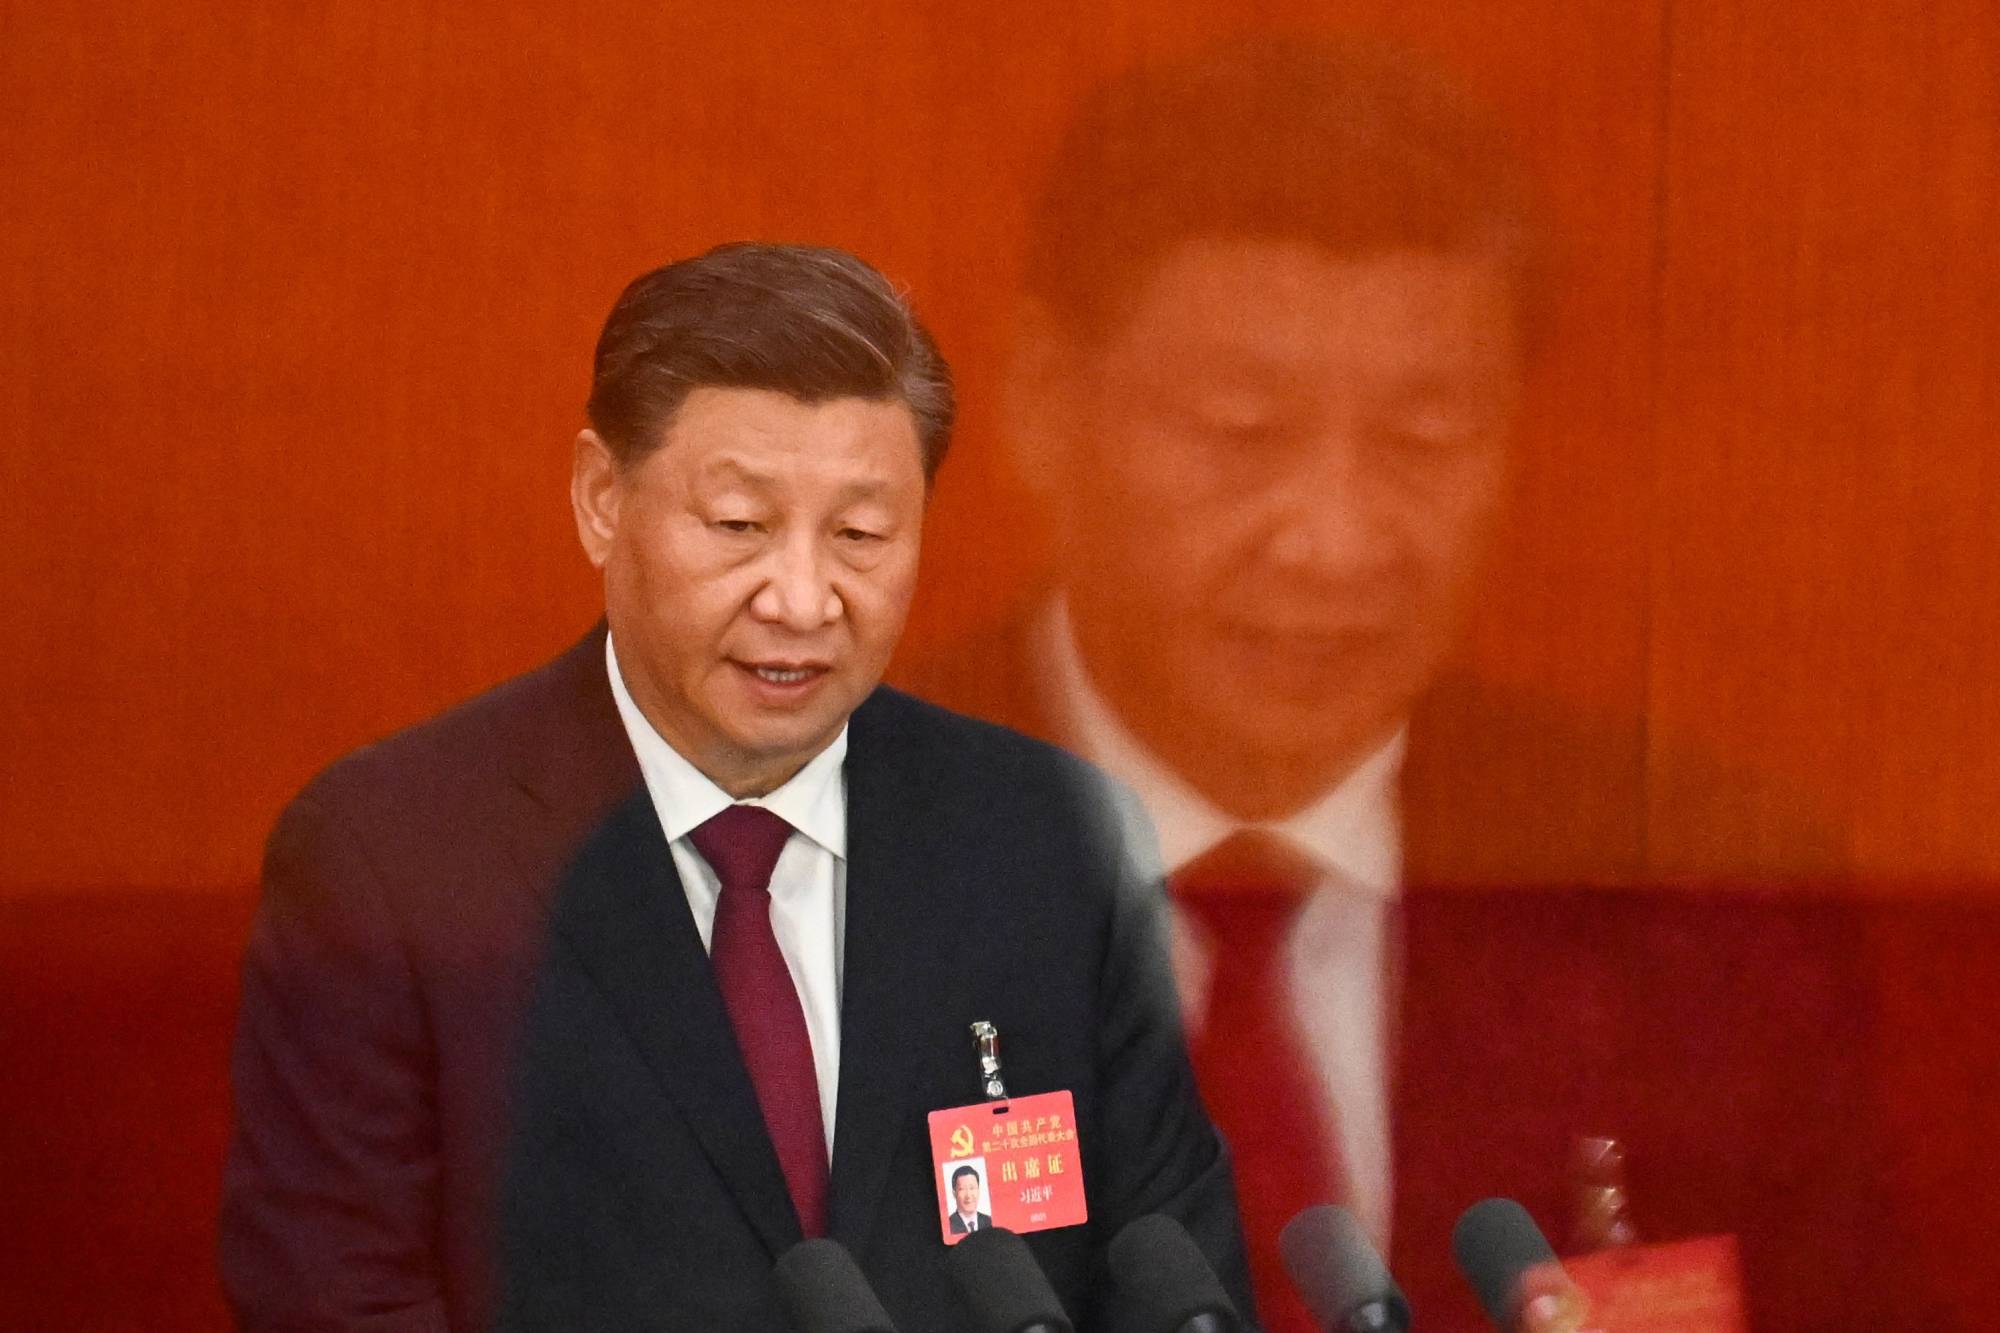 Chinaese President Xi Jinping speaks during the opening session of the 20th Chinese Communist Party's Congress at the Great Hall of the People in Beijing on Oct. 16. | AFP-JIJI